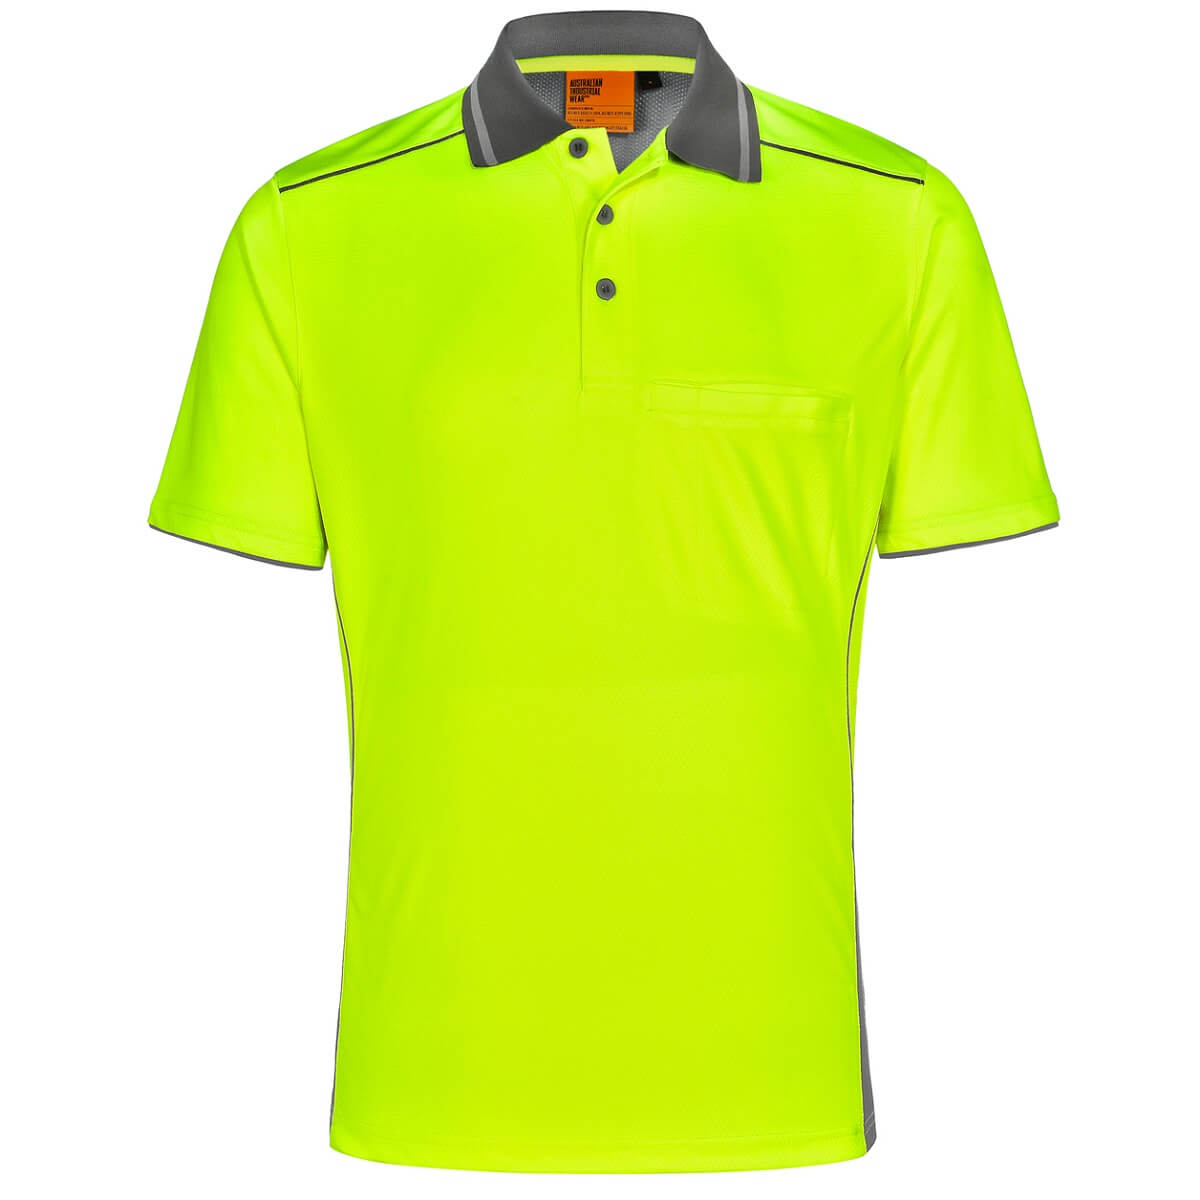 SW79 Unisex Hi-Vis Bamboo Charcoal Vented Polo